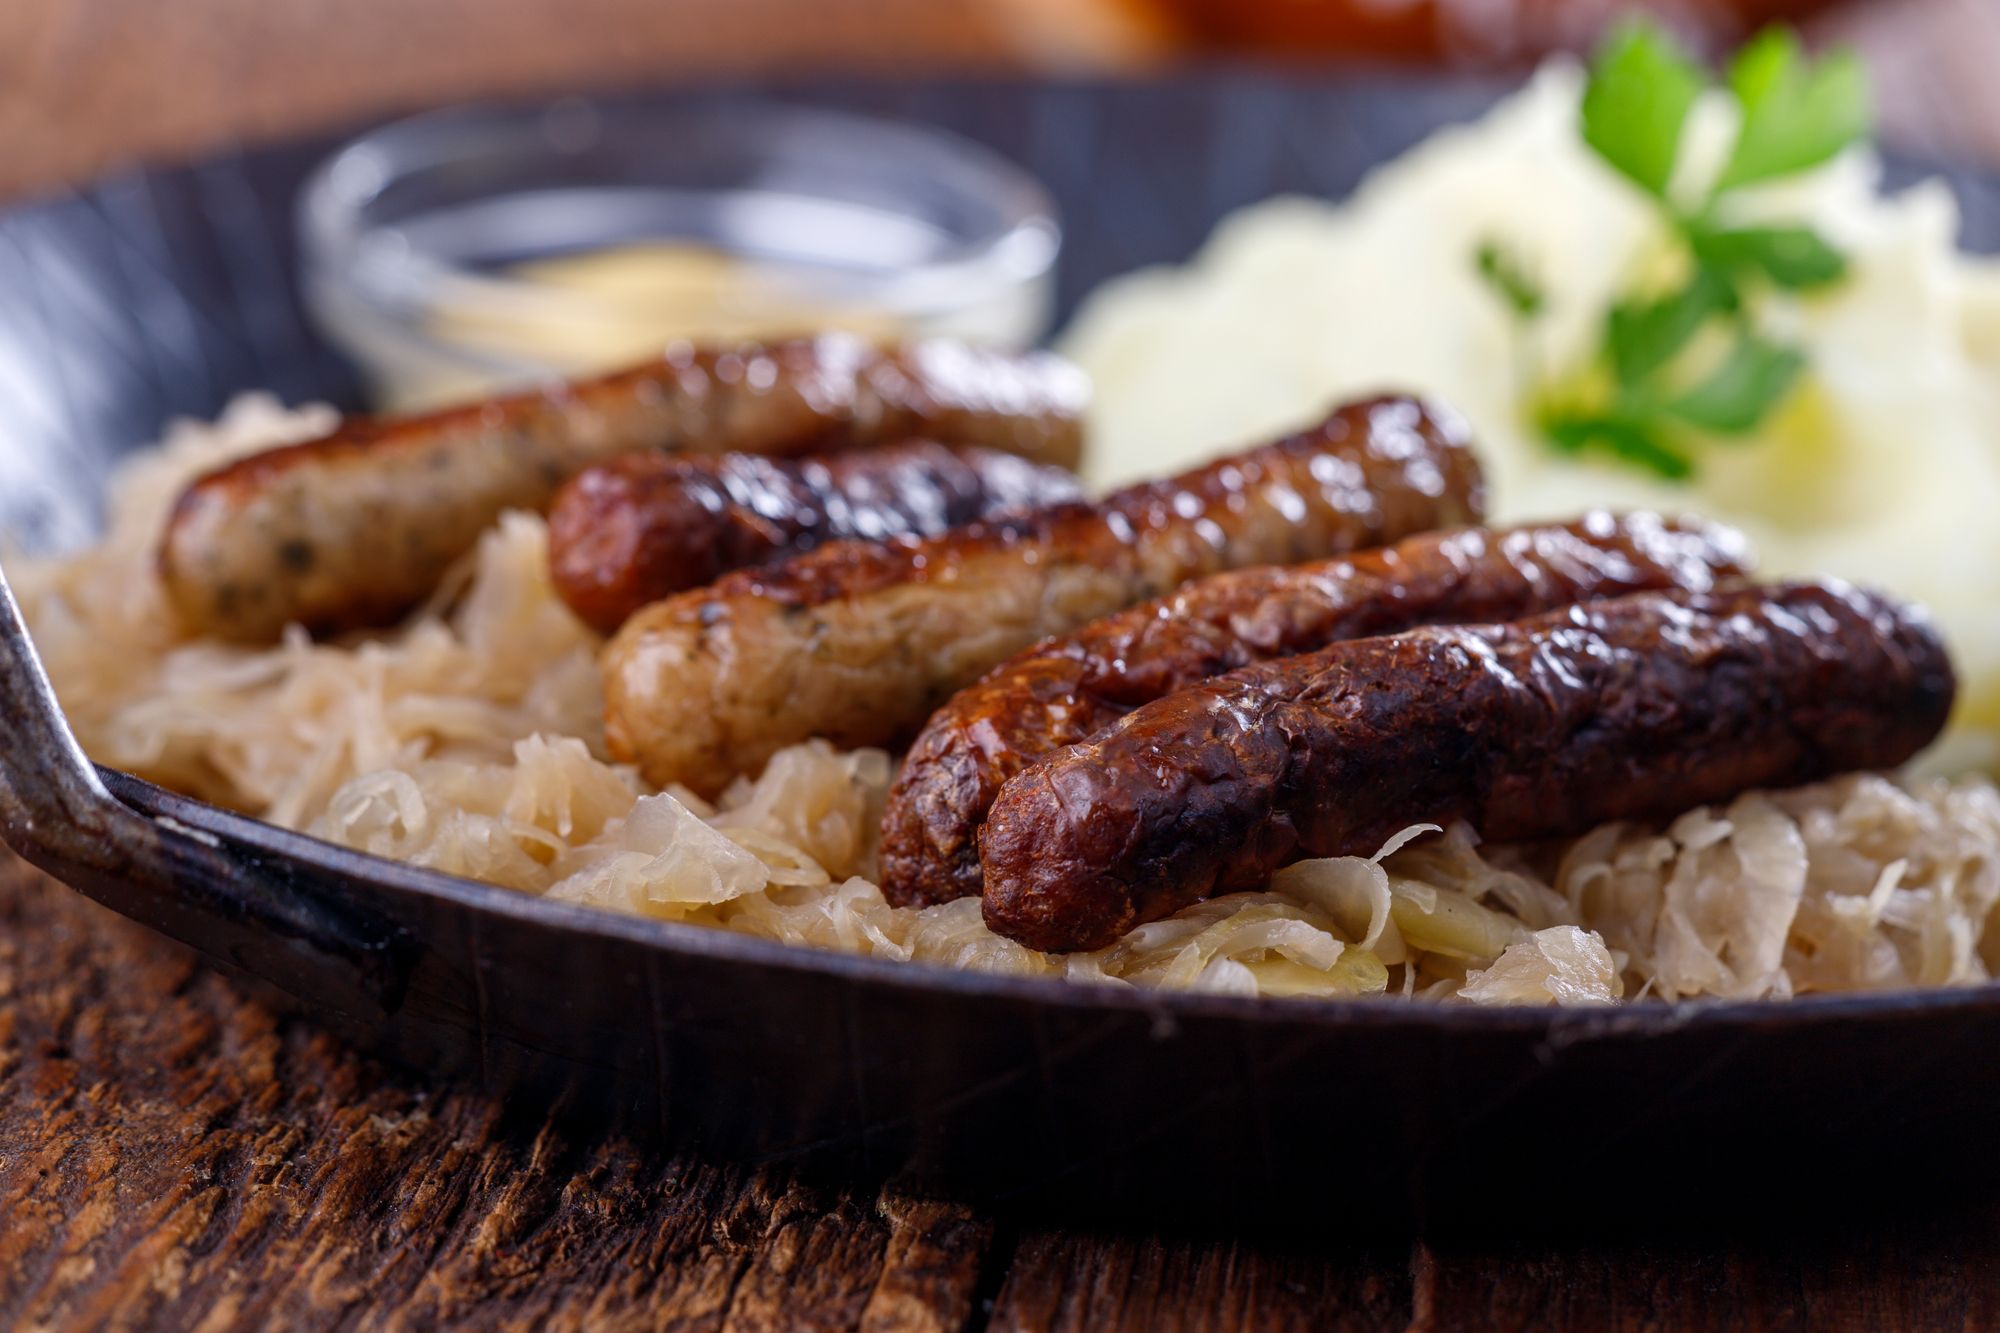 Bratwurst, Cabbage, and Caraway